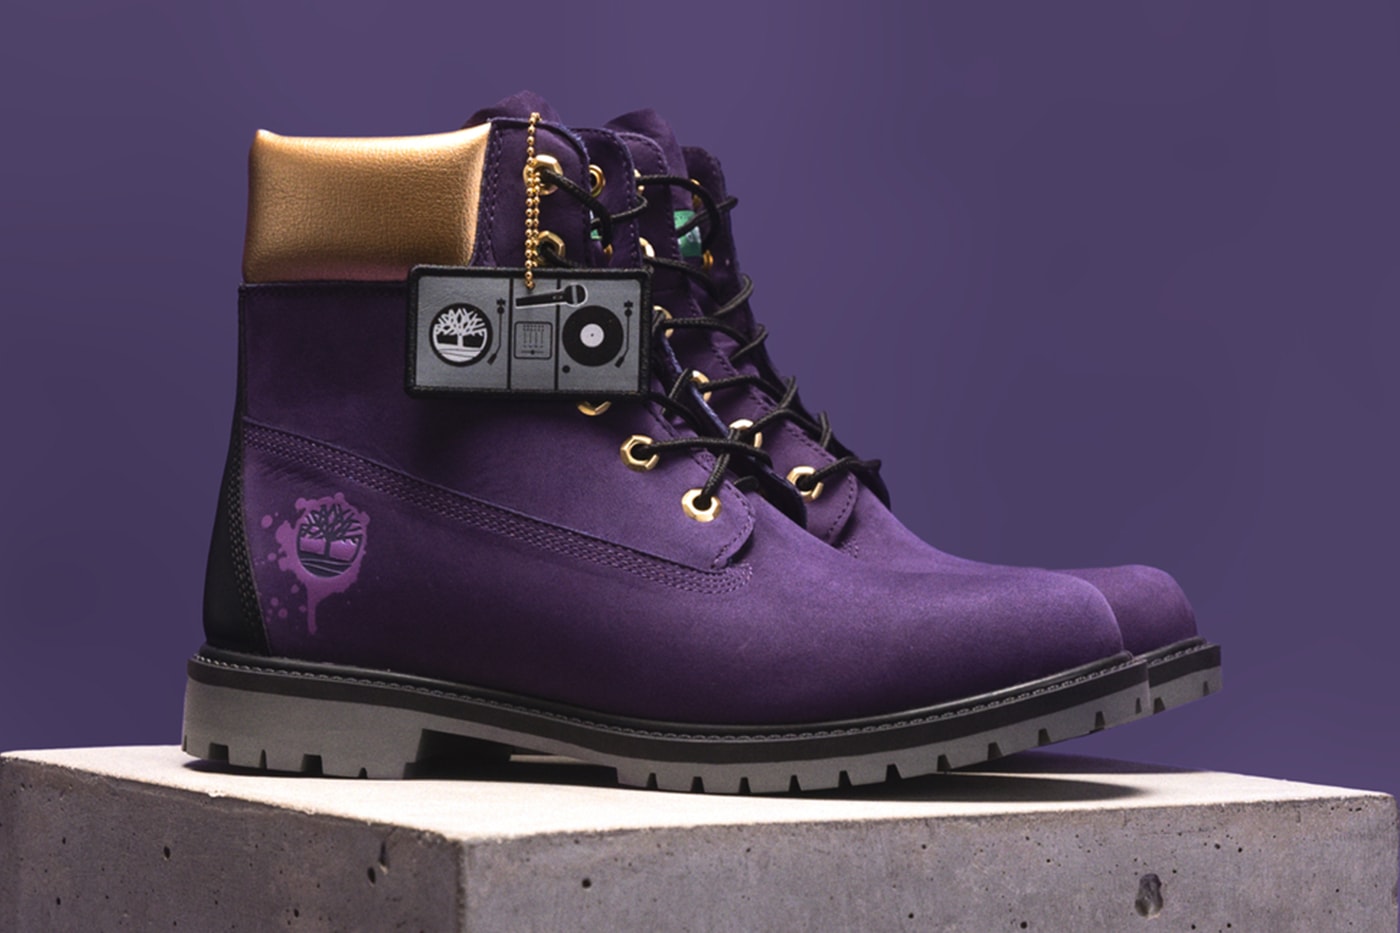 Timberland hip hop royalty boot 50 year anniversary classic yellow boot cnstnt dvlpmnt chris dixon release info date price